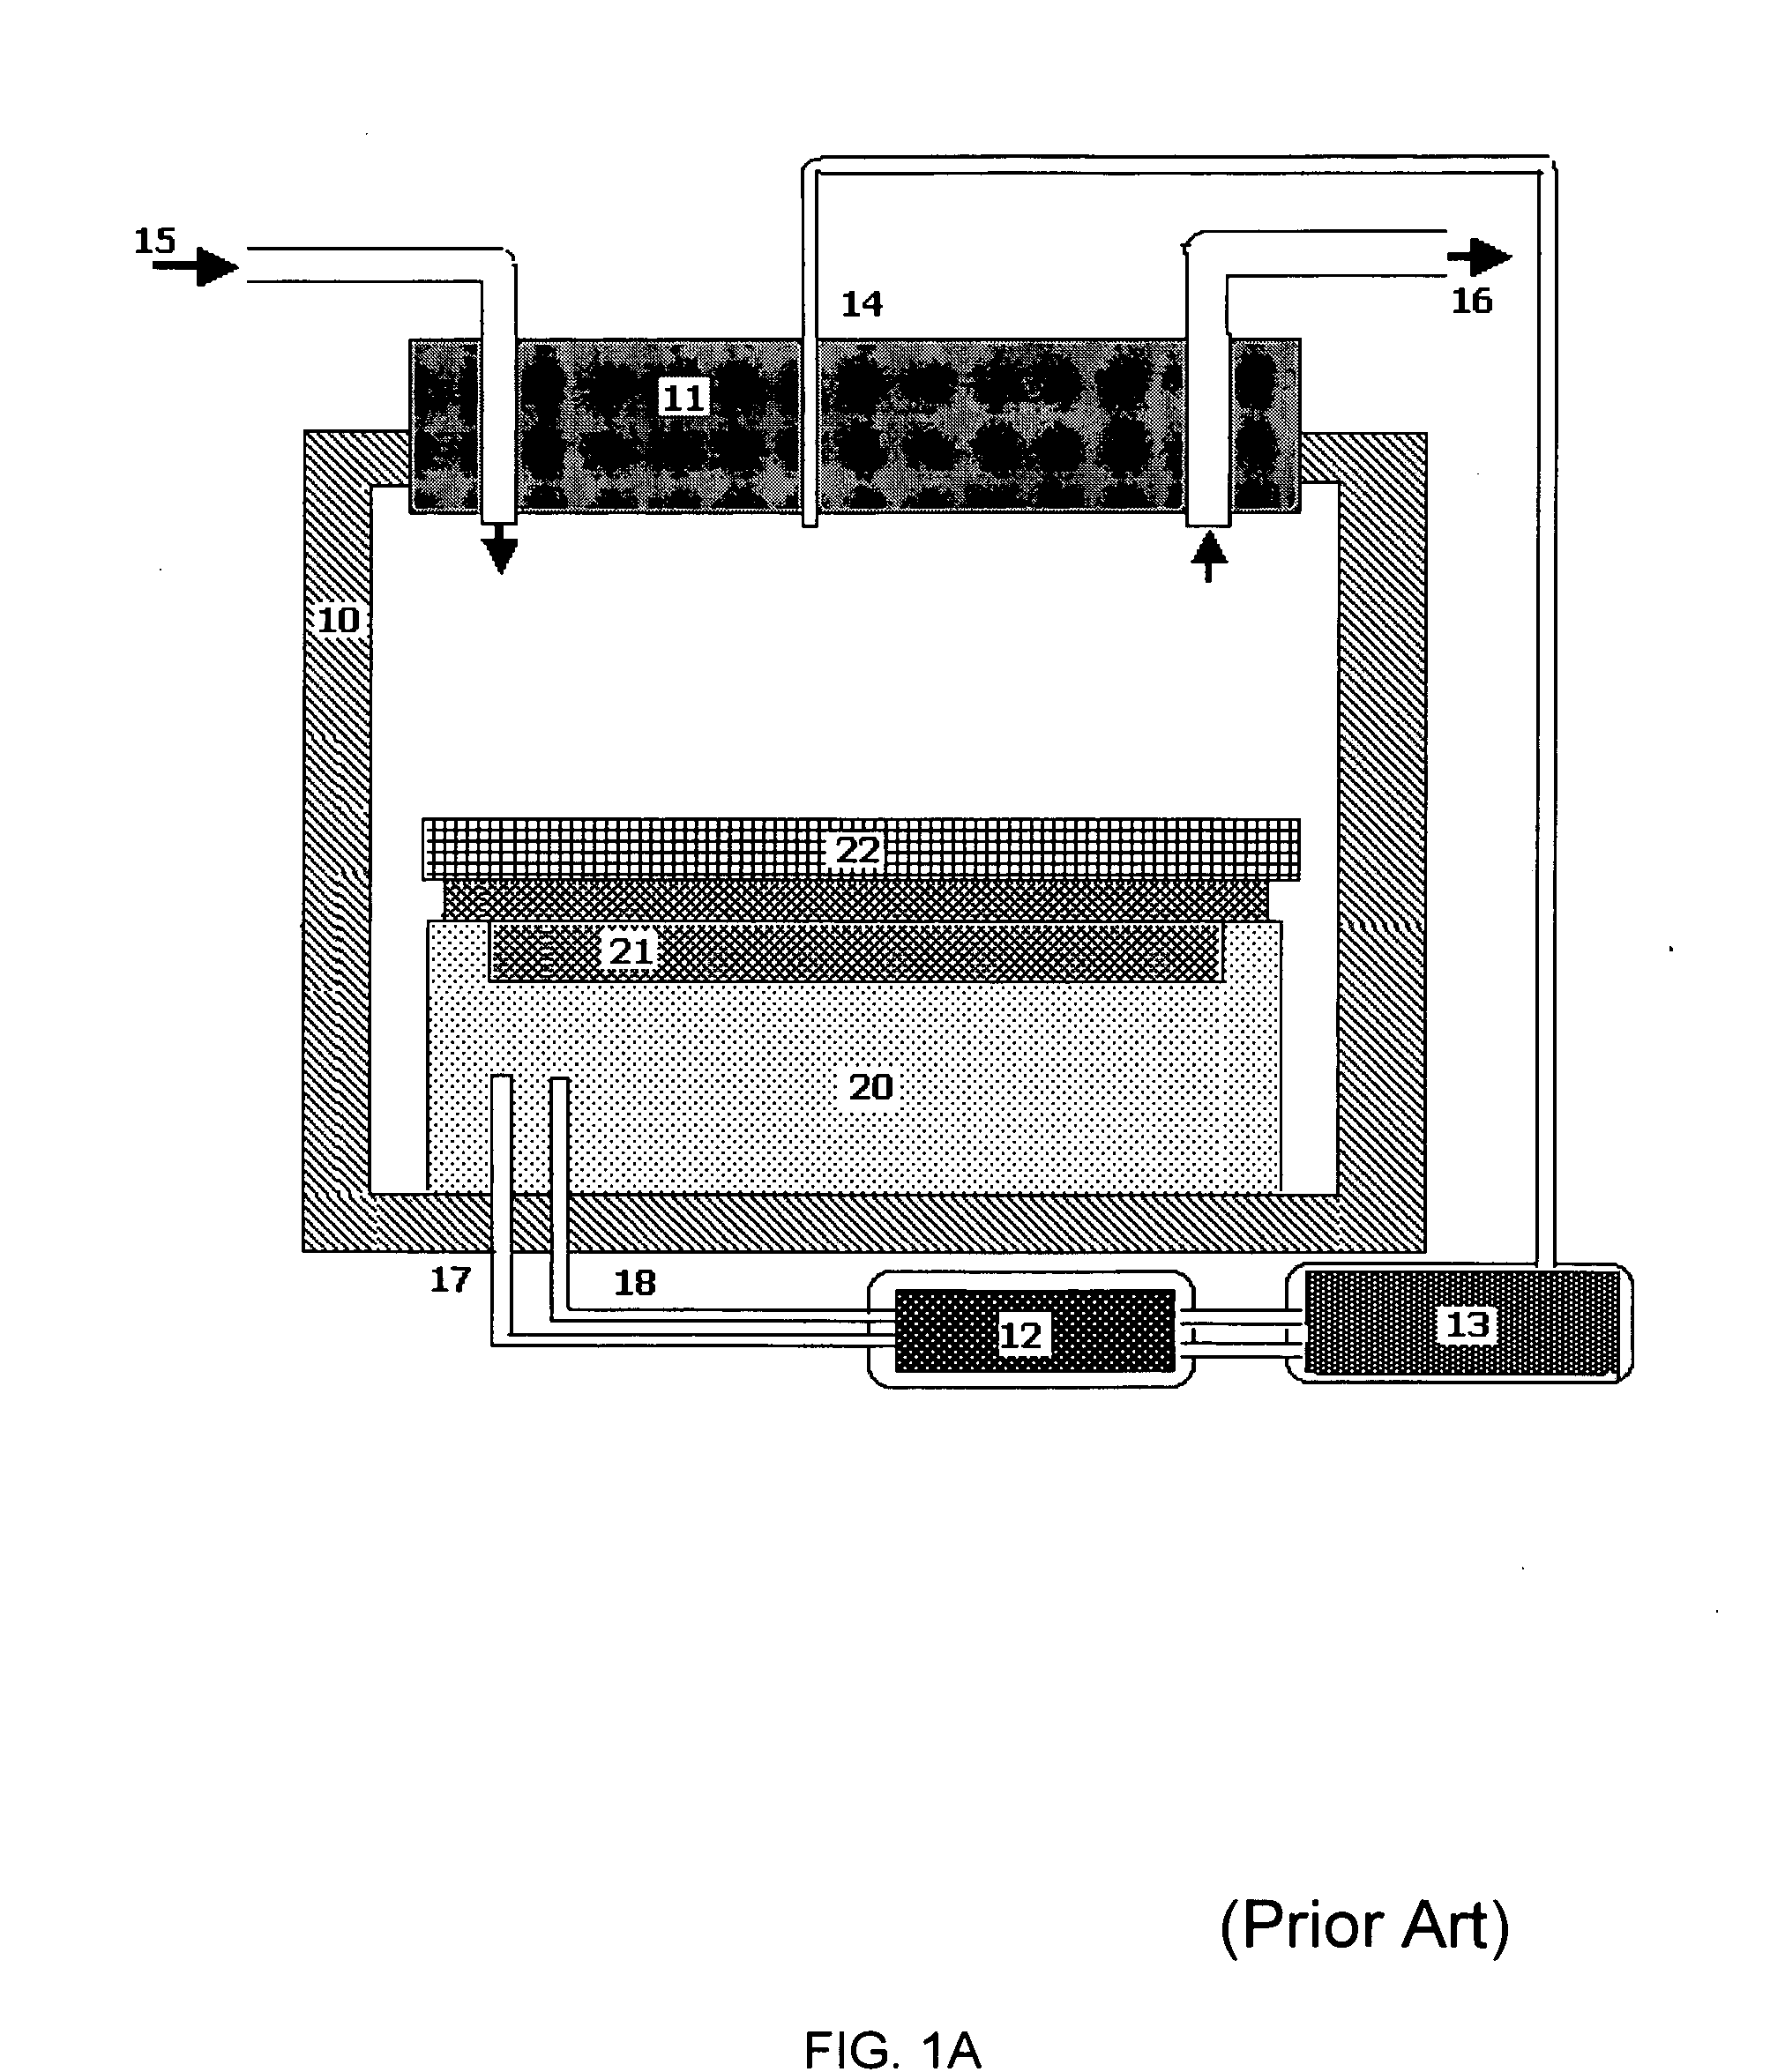 Methods and apparatuses for high pressure gas annealing